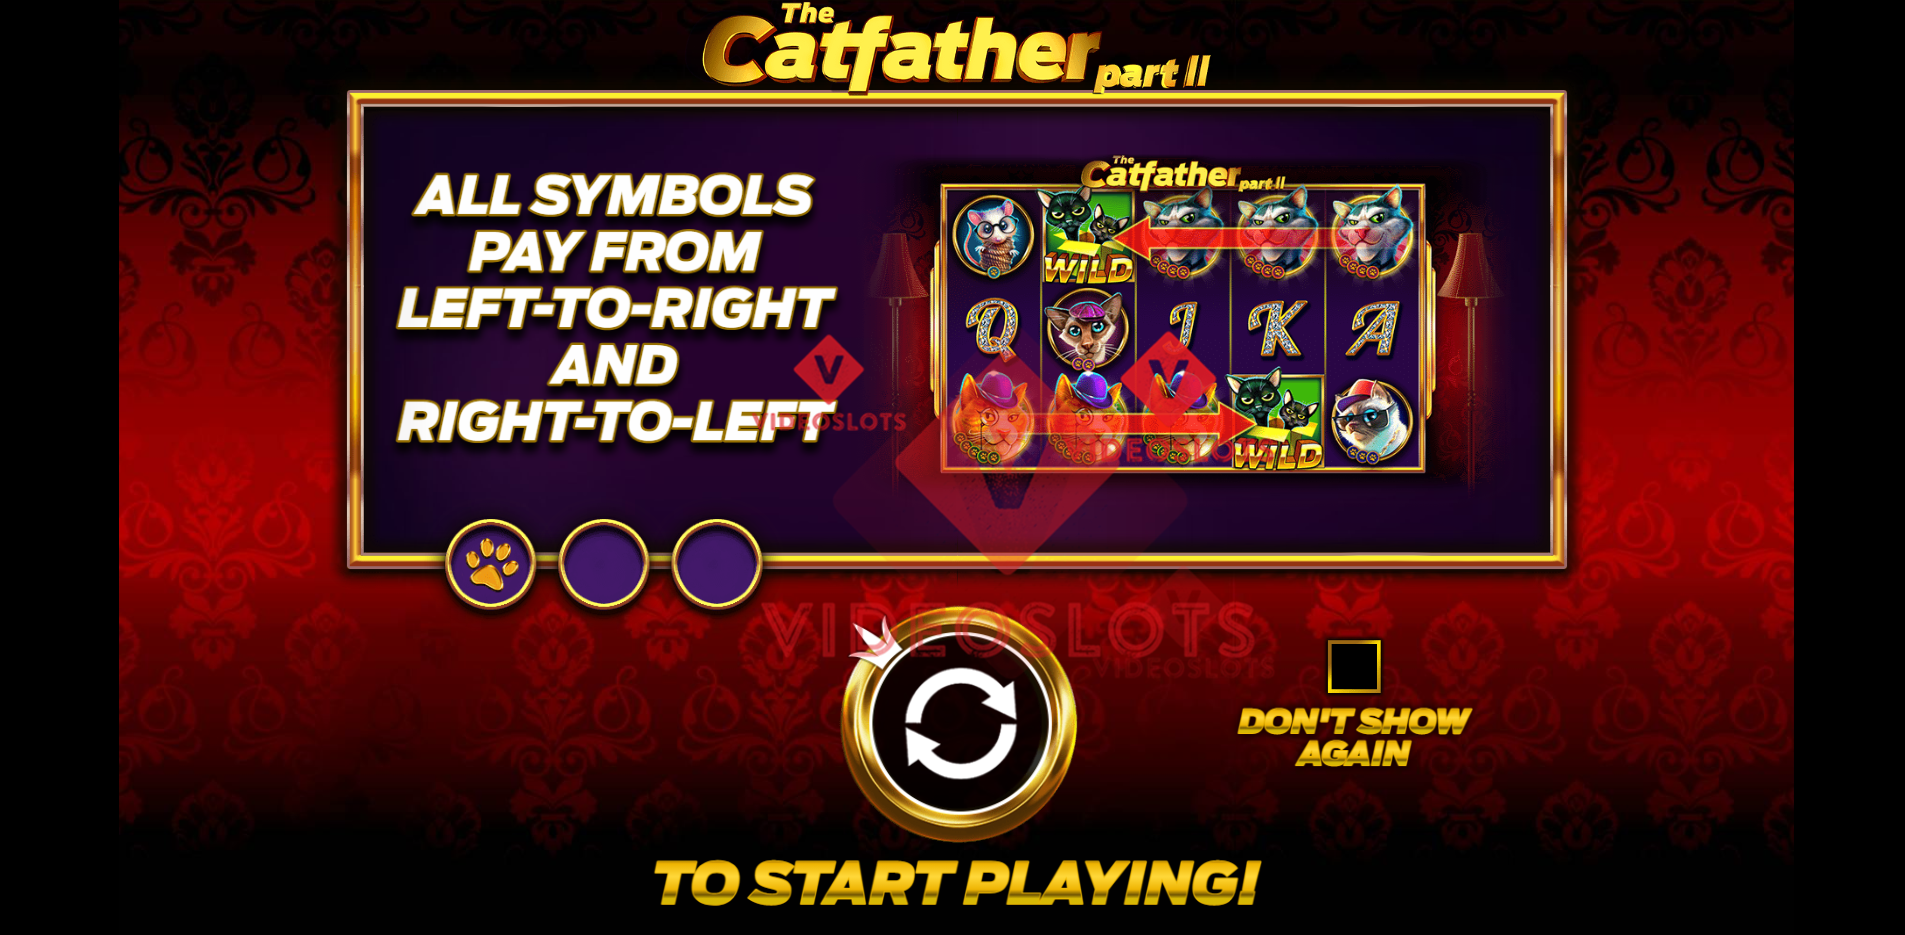 Game Intro for The Catfather Part Ii slot by Pragmatic Play